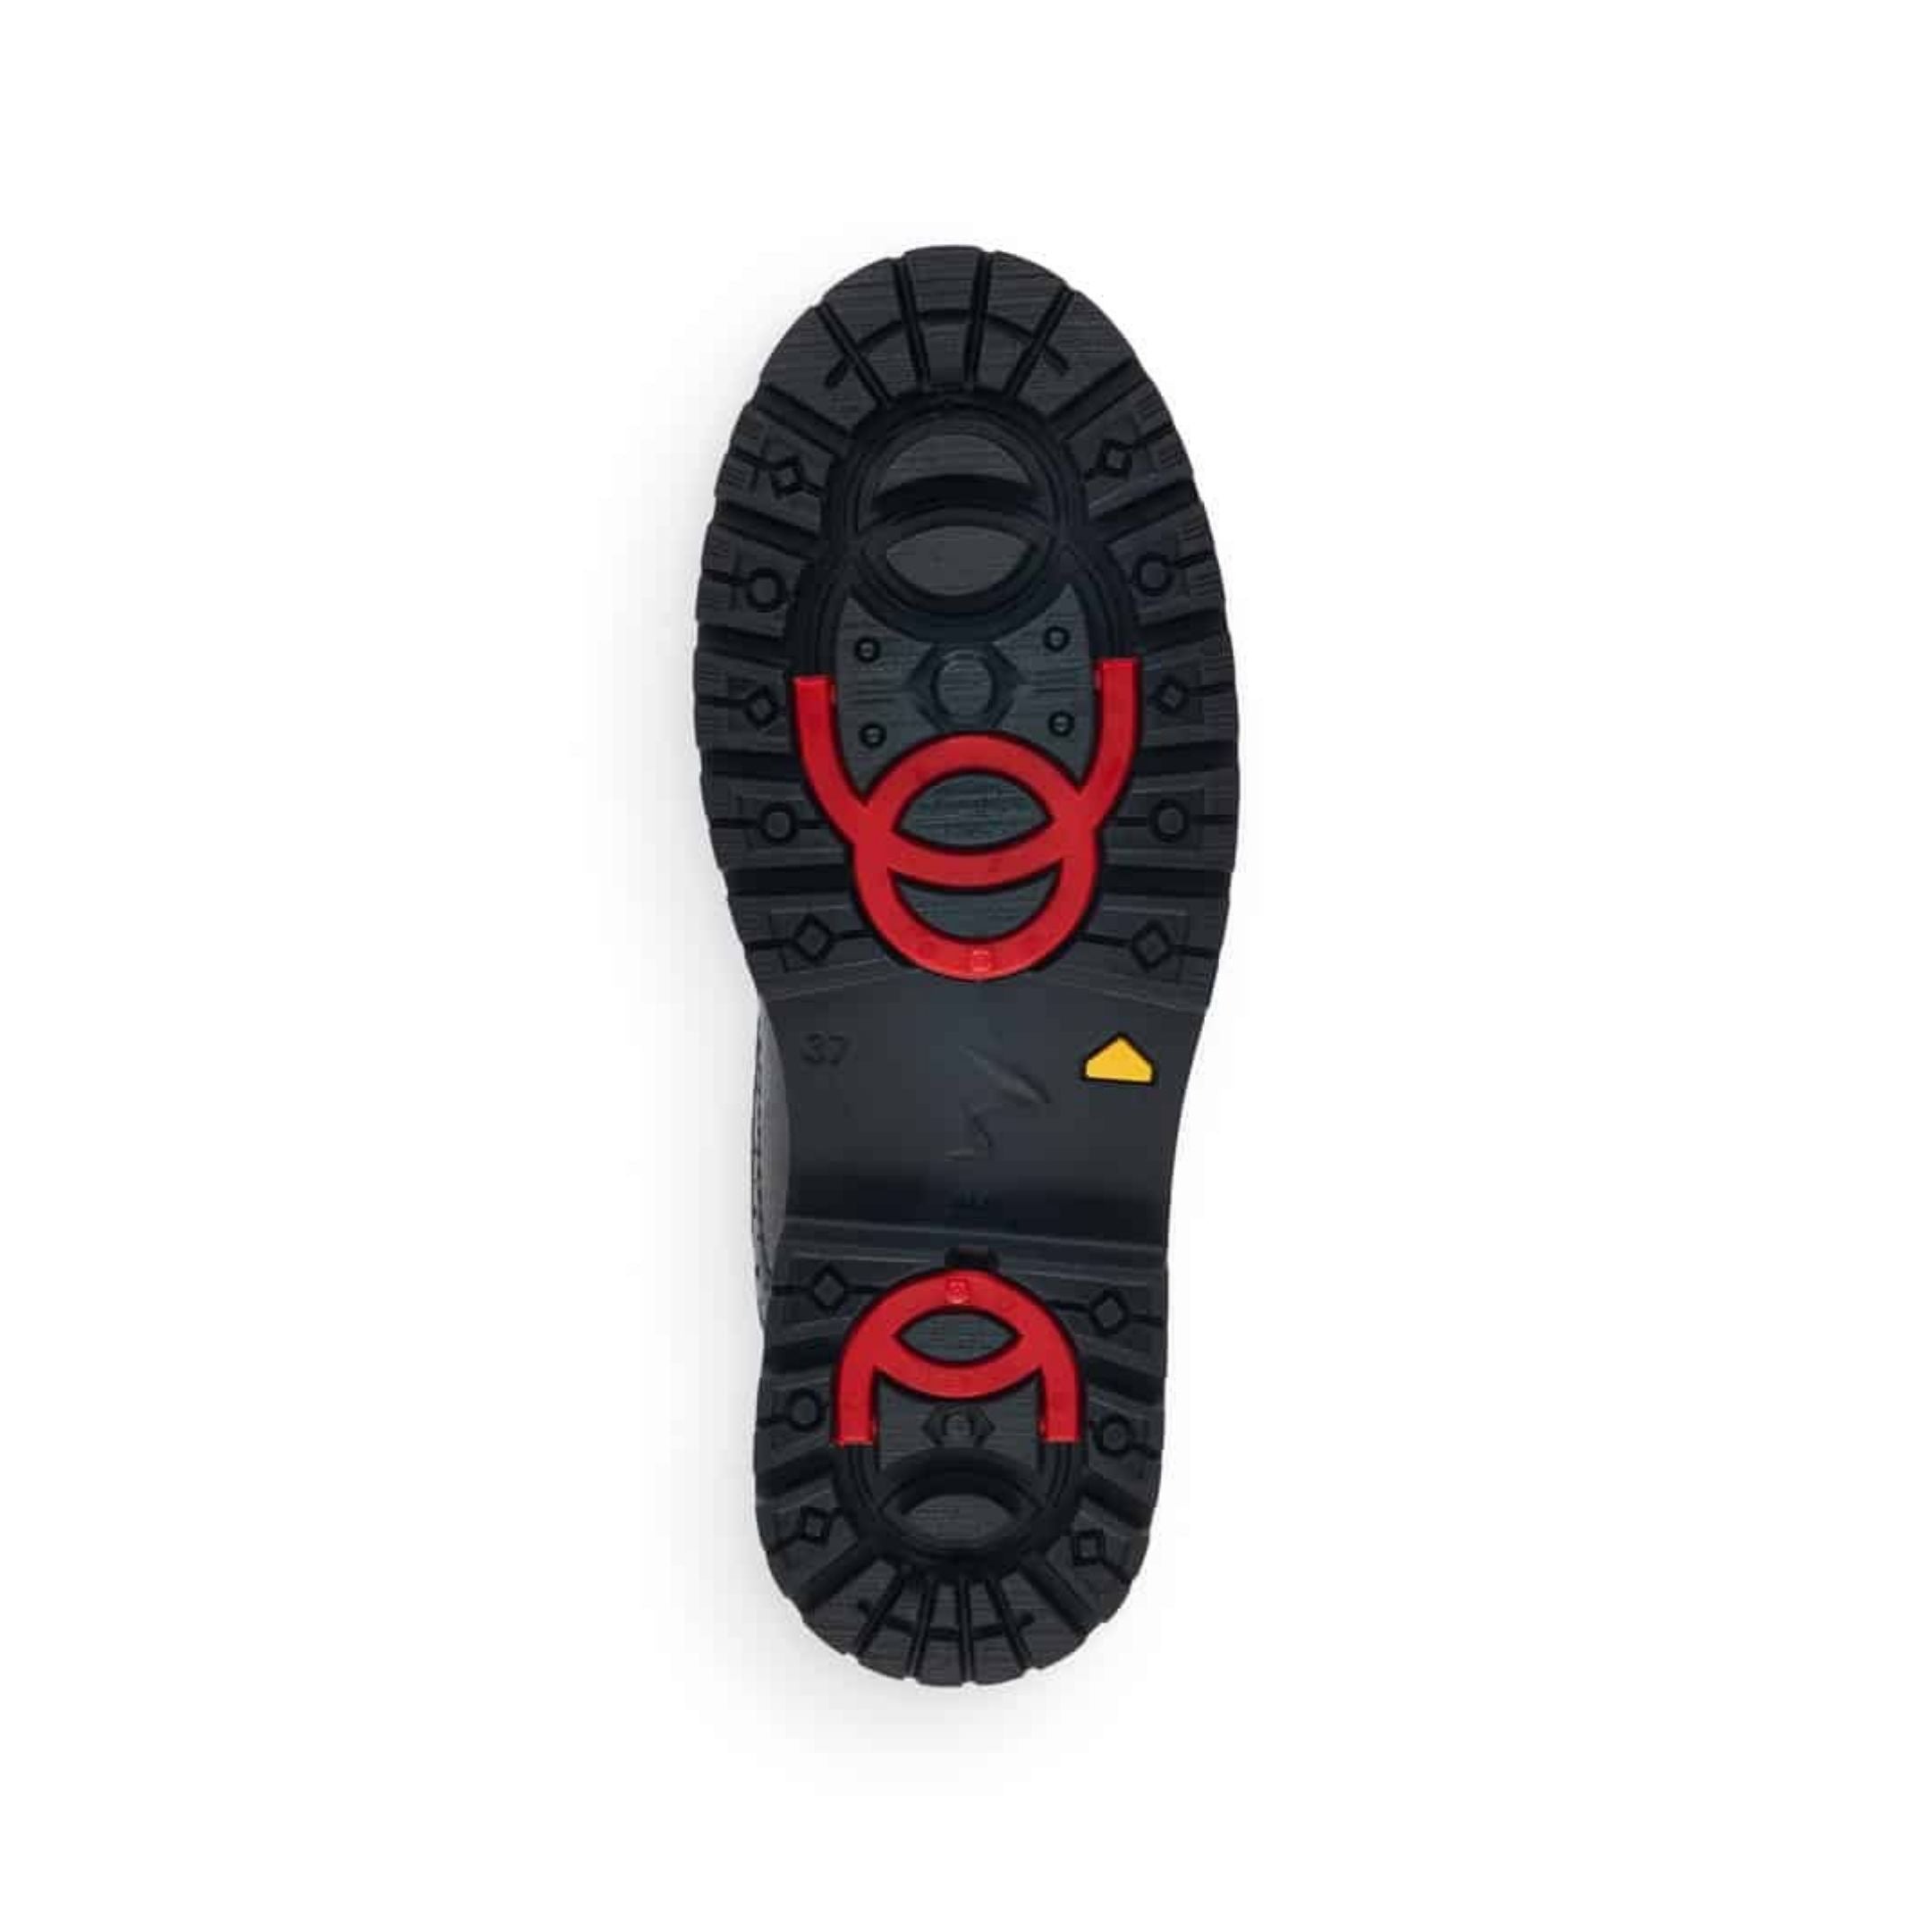 Black rubber outsole with great grip and red collapsible ice cleats